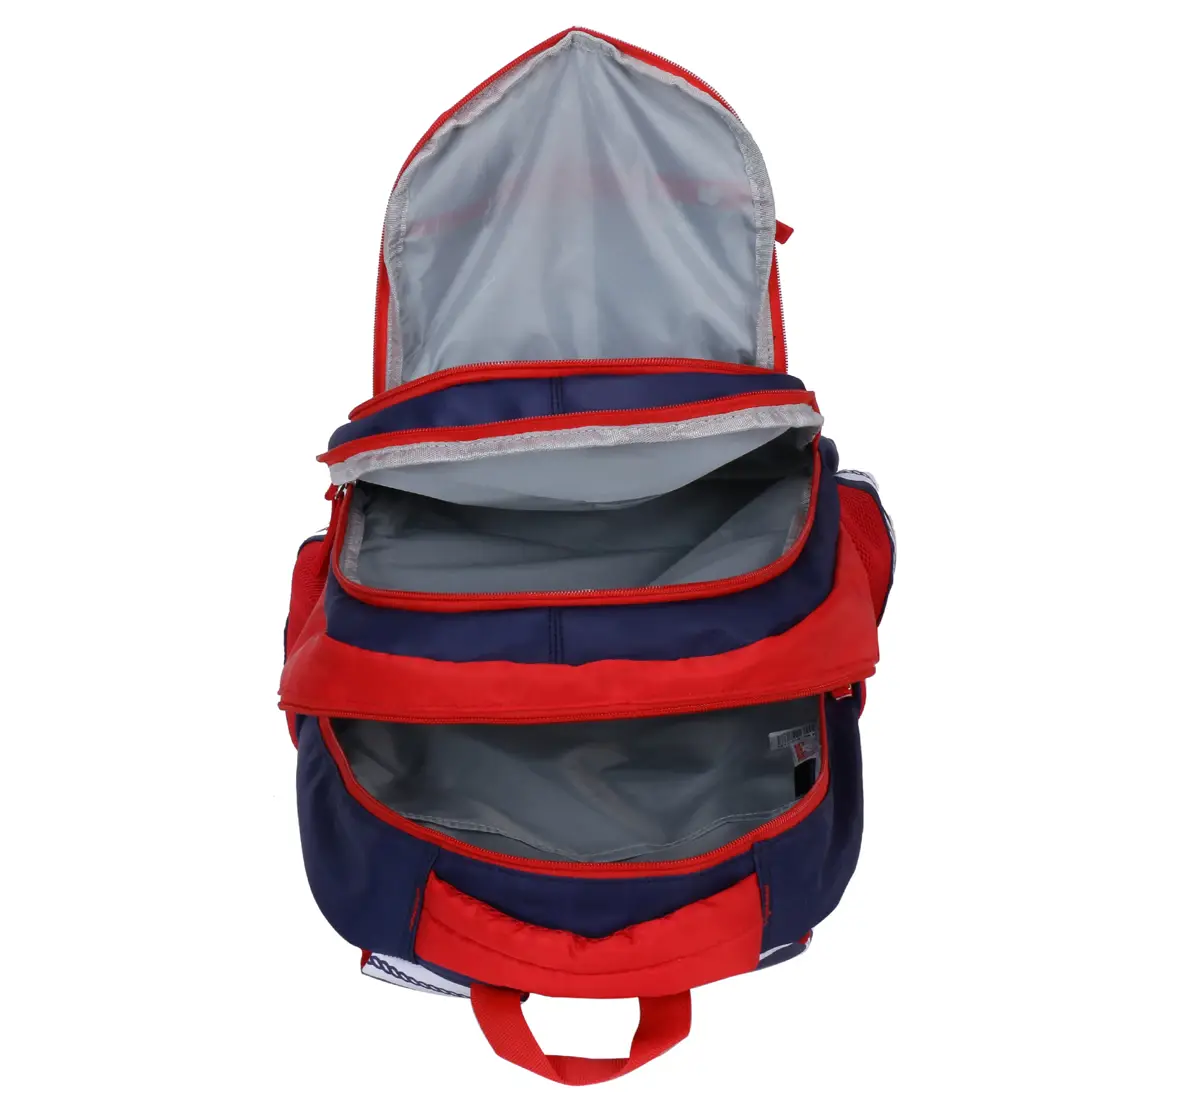 Simba Gravity Great Adventure 19 Backpack Multicolor 3Y+